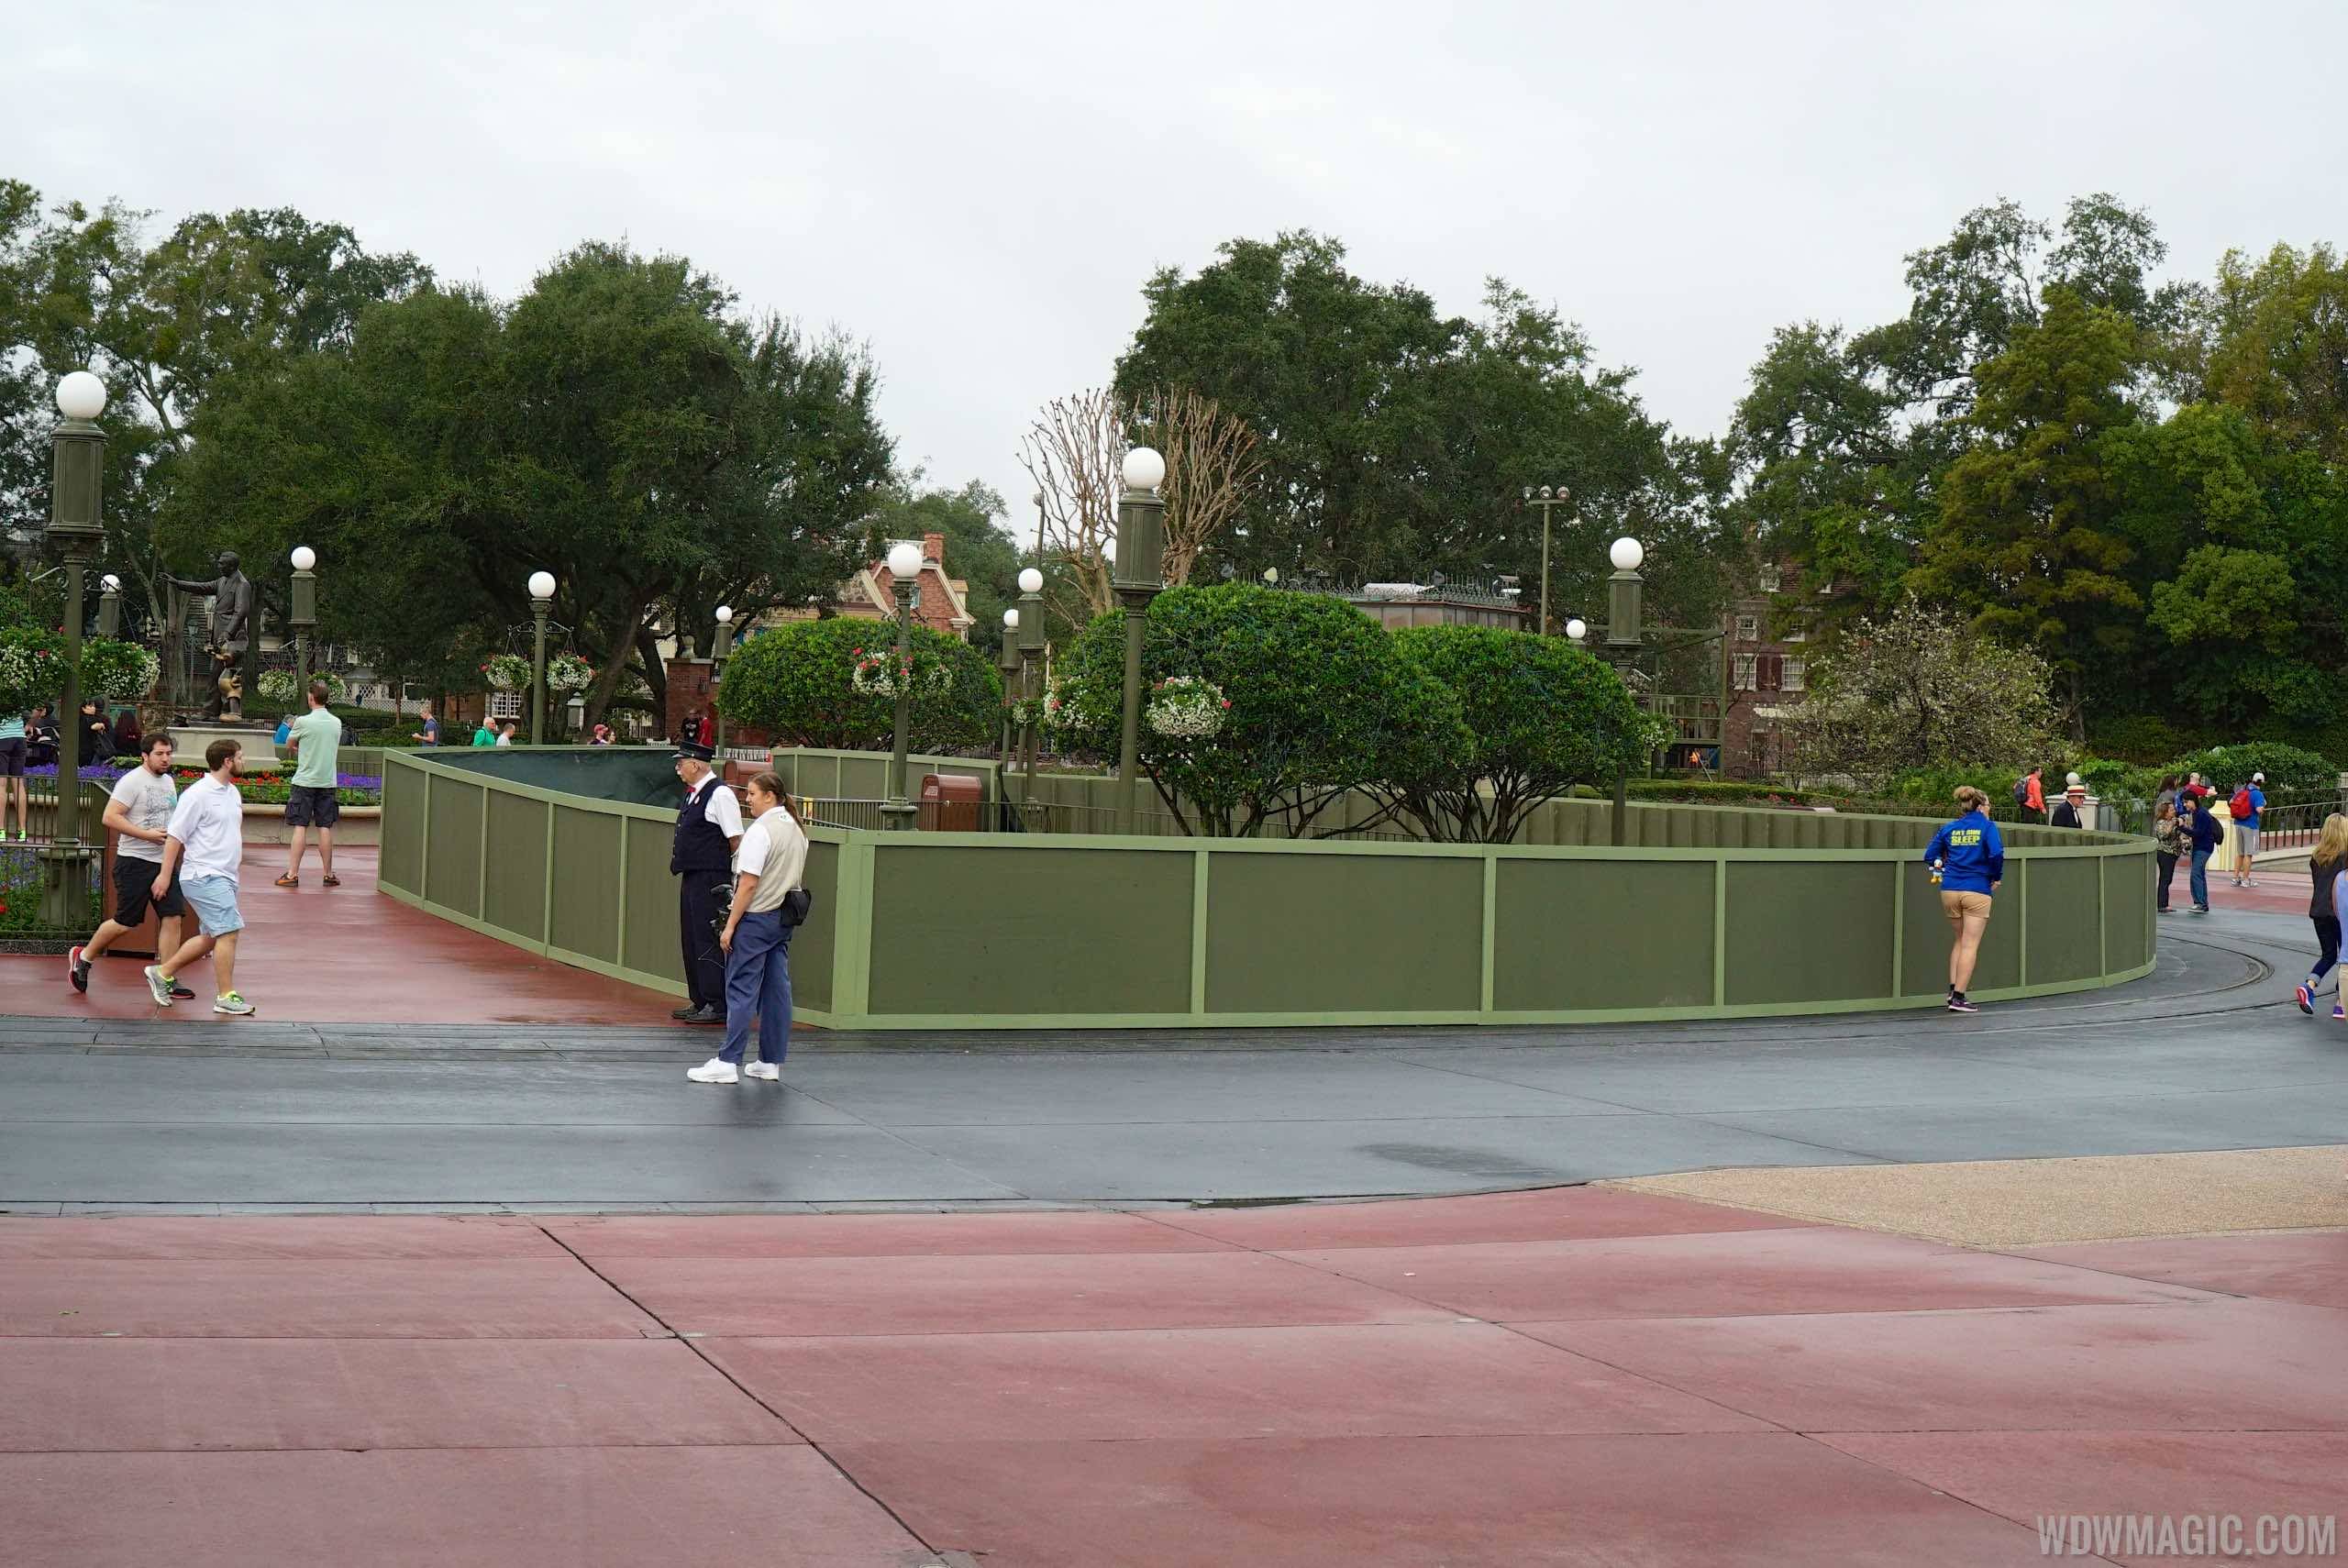 PHOTOS - Construction walls up around the center of the hub area at the Magic Kingdom